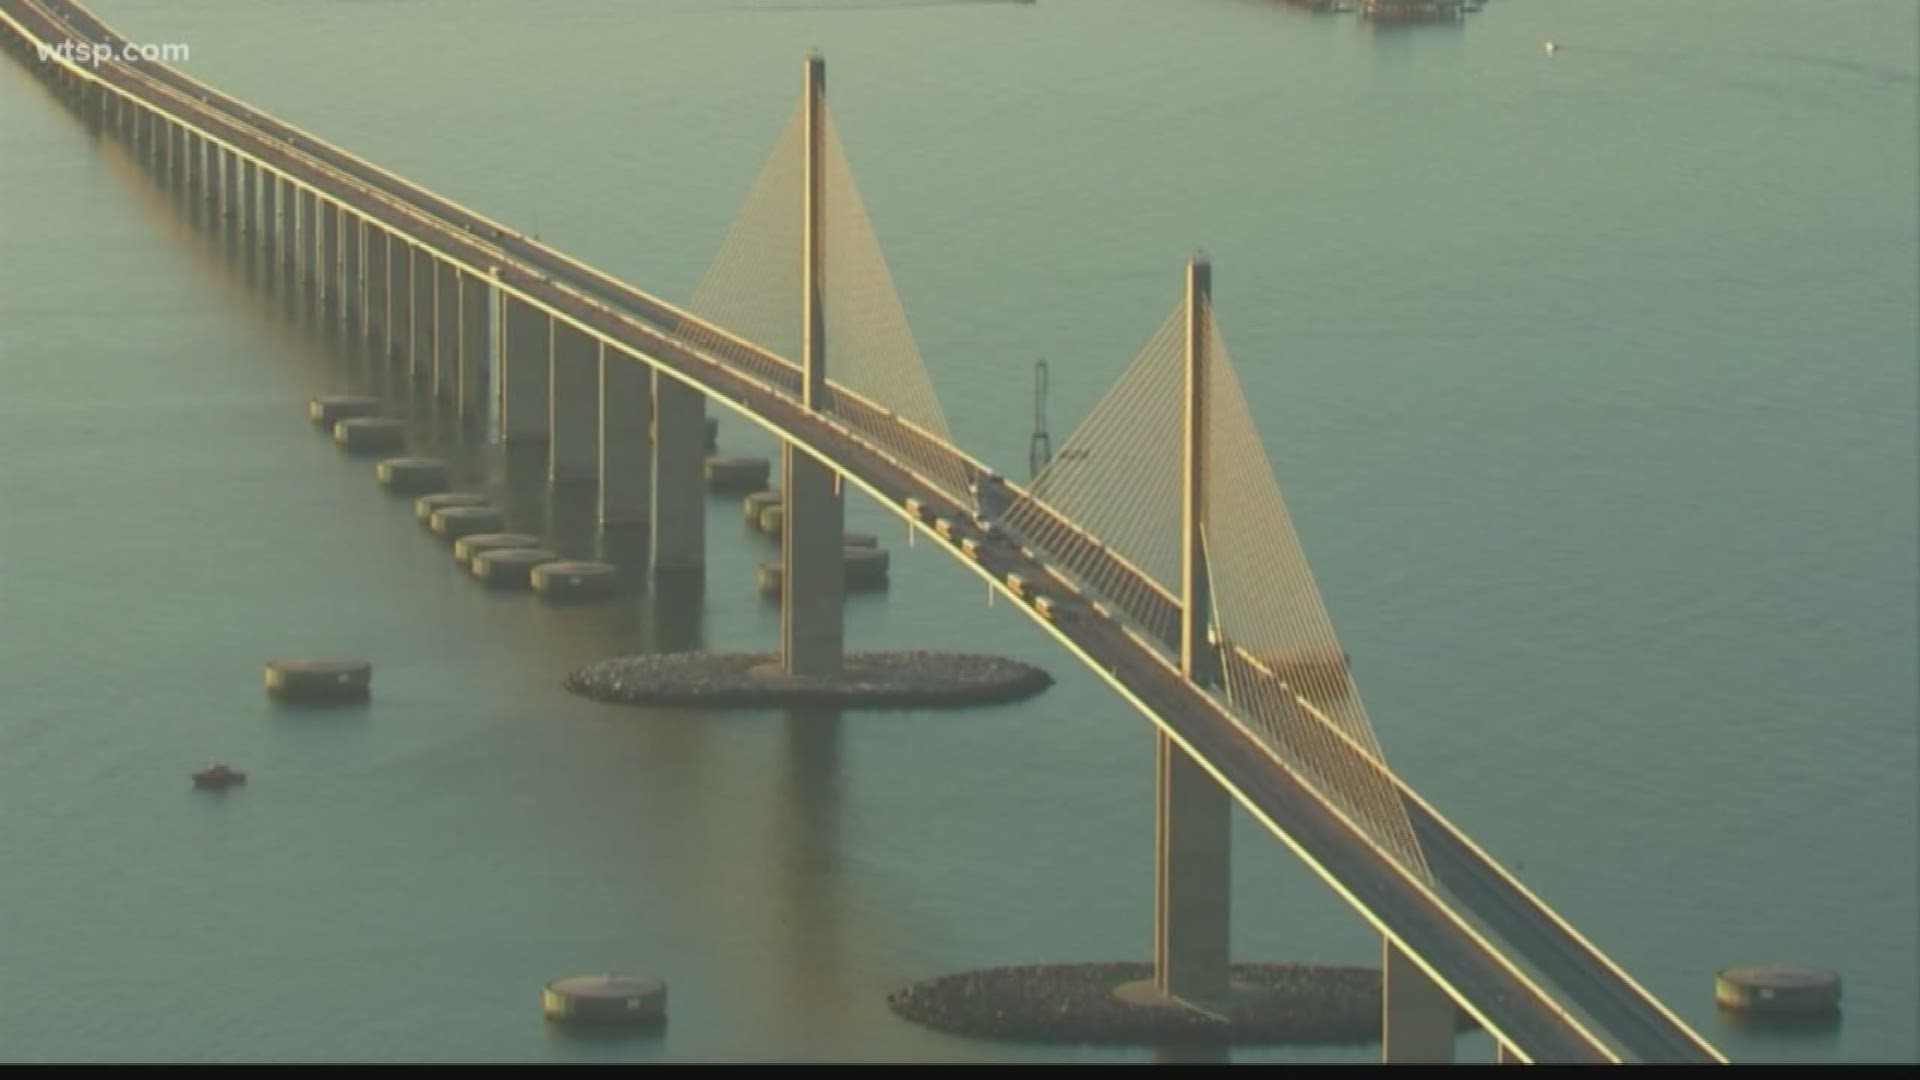 The third annual Skyway 10K will be held on March 1, 2020.

That announcement was made Thursday morning in St. Petersburg.

The run will be limited to 8,000 people.

The lottery for the race opens on Oct. 3 and closes on Oct. 20. 

Registration opens on Oct. 21.

The Skyway 10K is the only yearly run across the iconic Bob Graham Sunshine Skyway Bridge. It benefits the nonprofit Armed Forces Families Foundation, which supports our military service members and their loved ones.